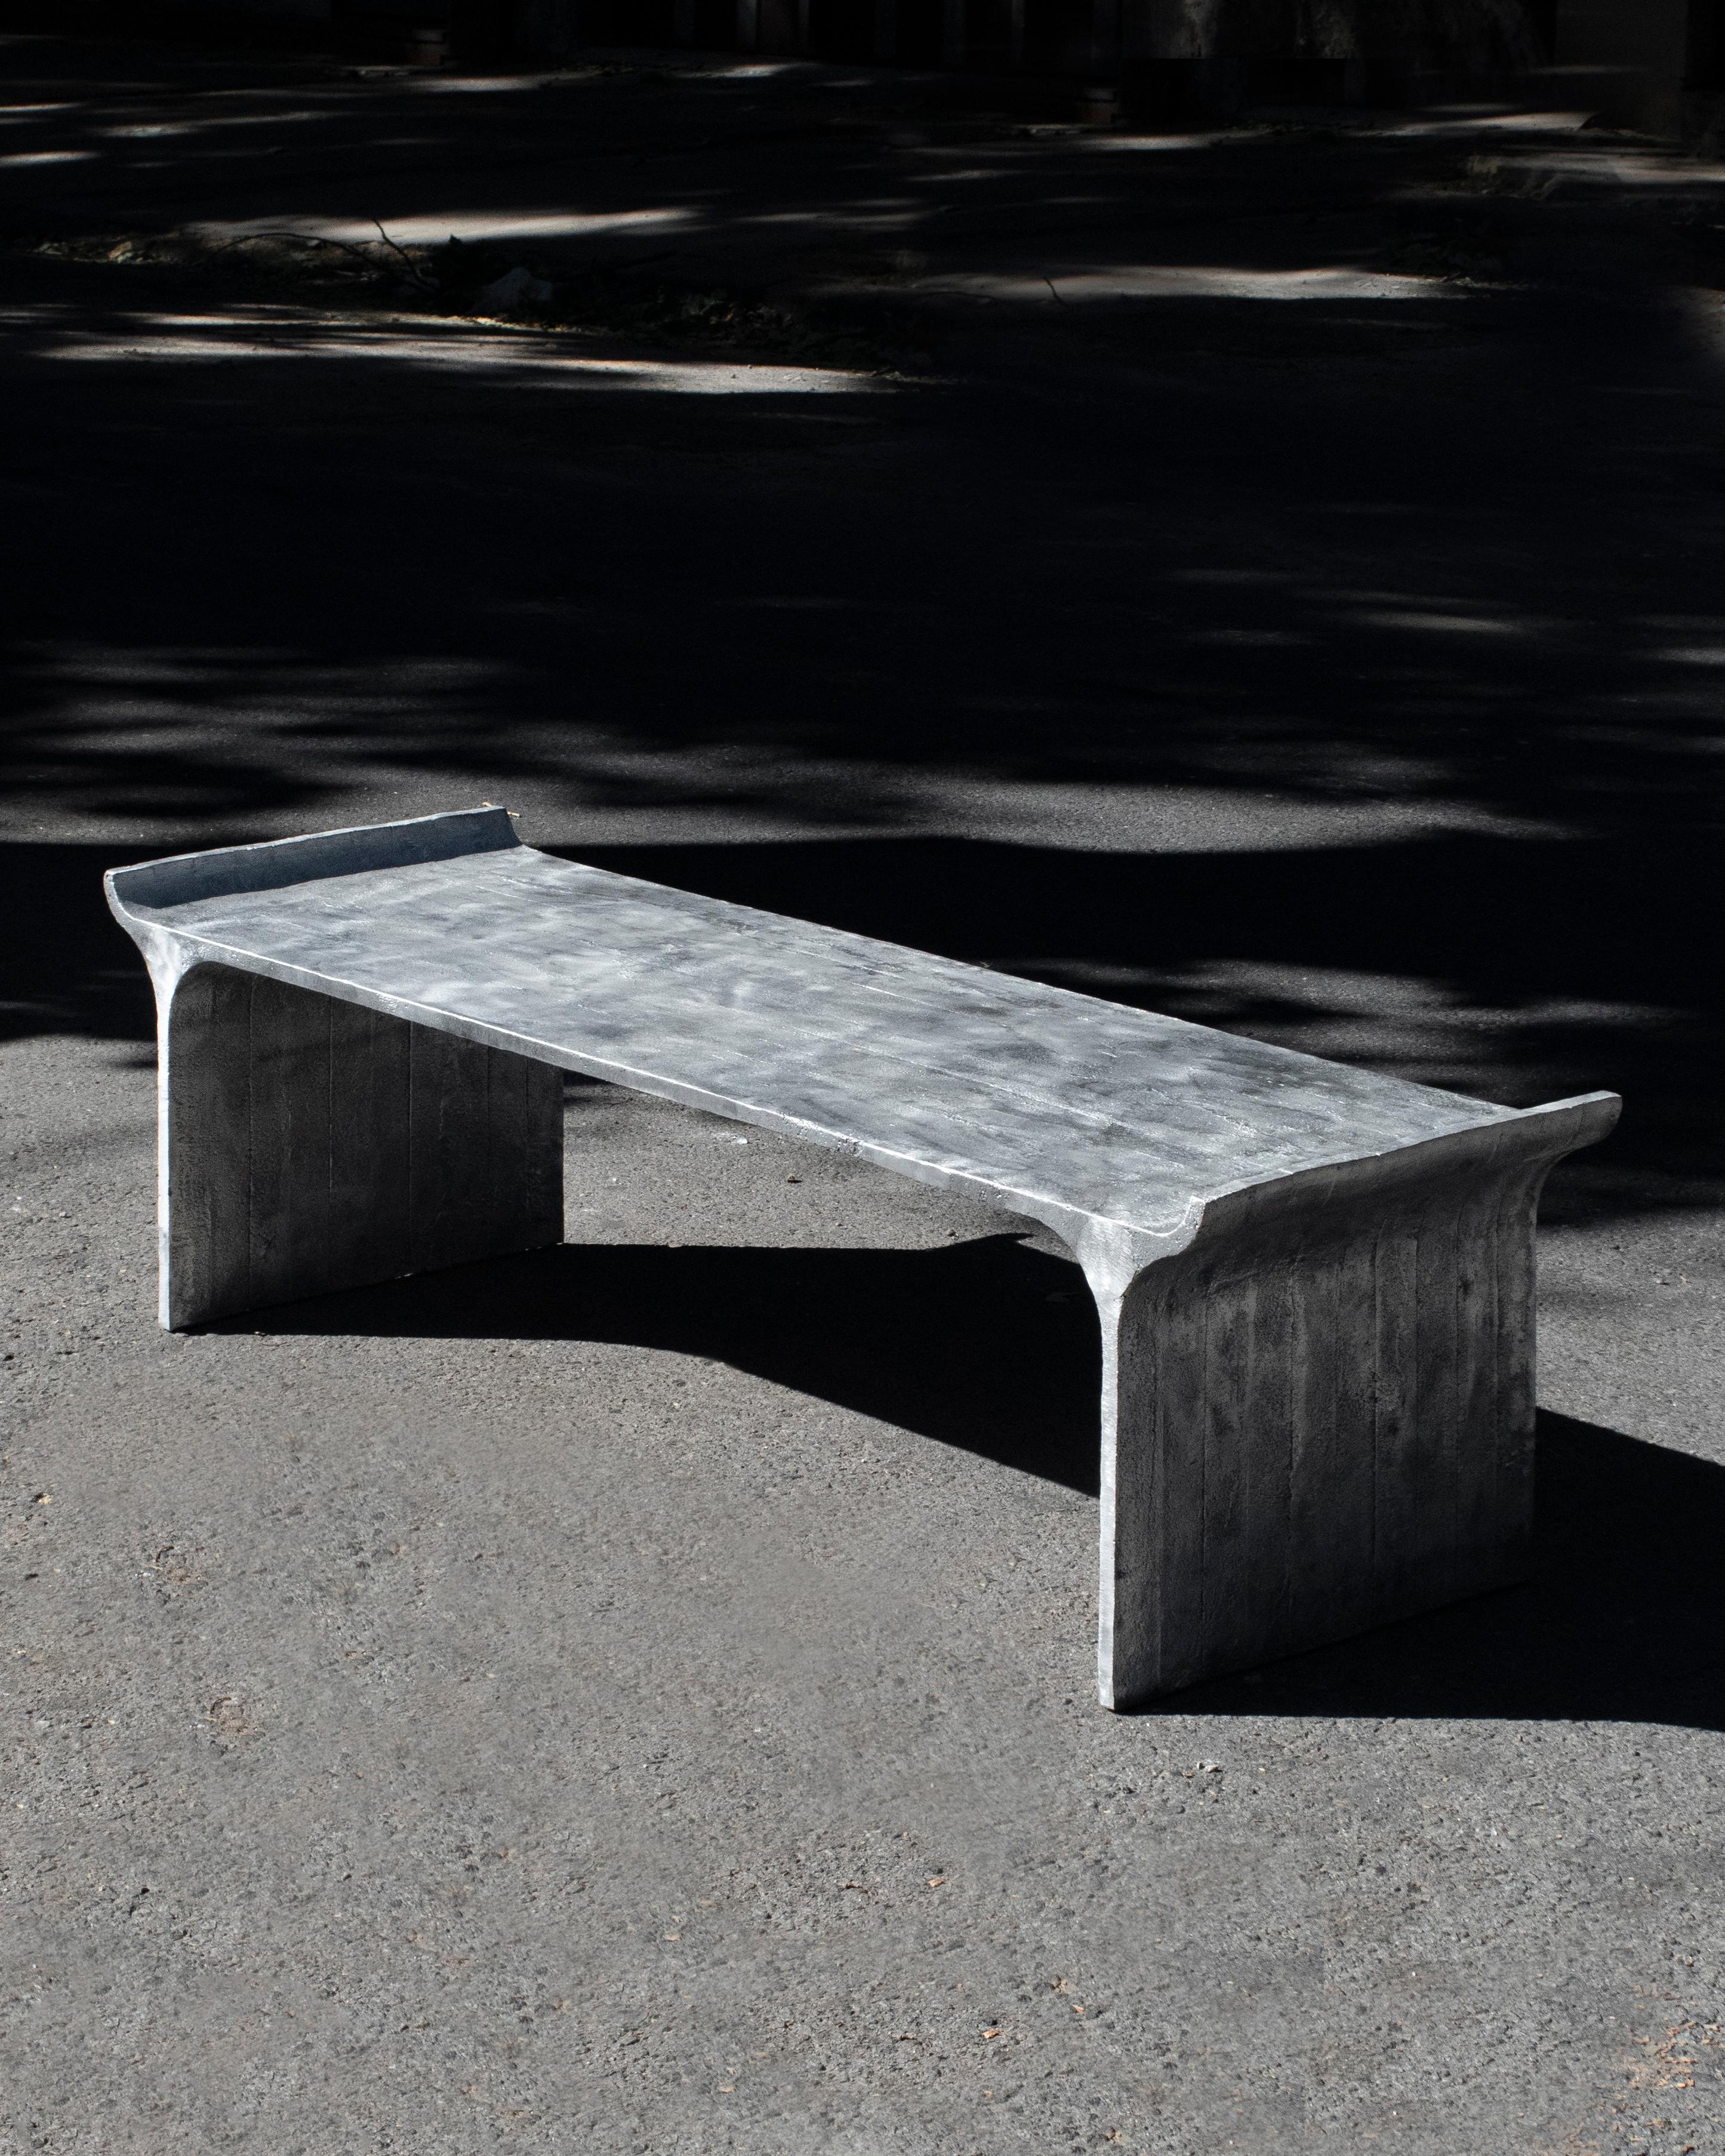 Tori coffee table by Ries
Dimensions: W160 x D440 x H46 cm 
Materials: Sand cast aluminum

Ries is a design studio based in Buenos Aires, Argentina, focused on product and conemporary furniture design. The studio’s approach to design is